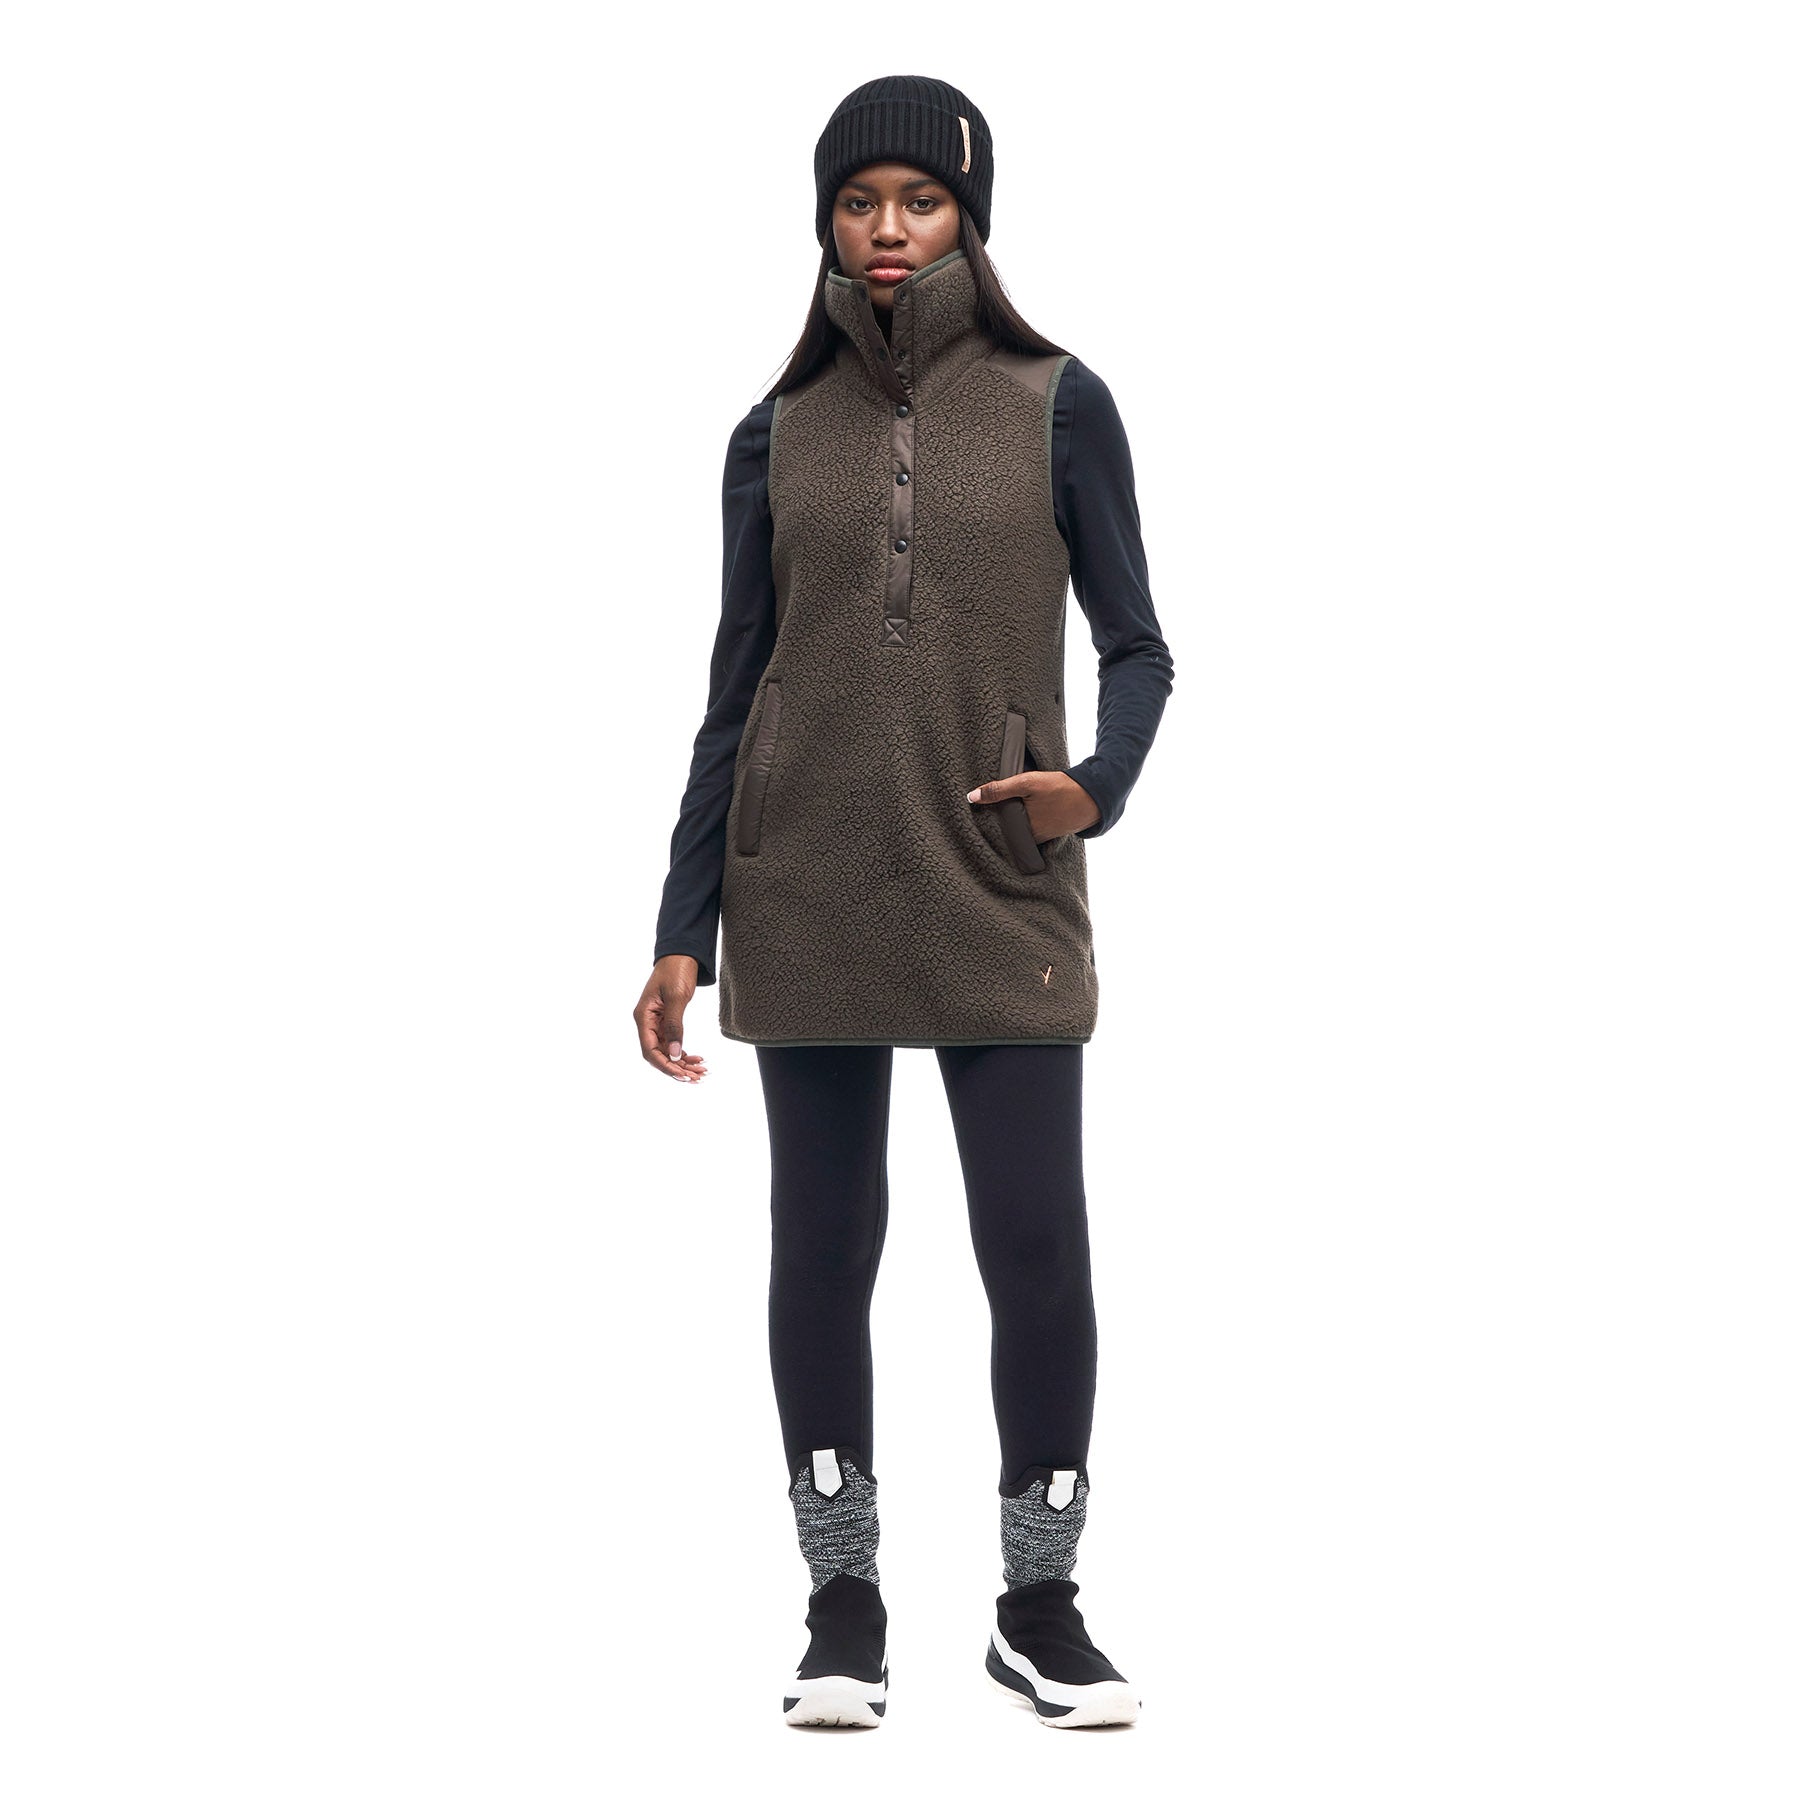 Hero image featuring a front facing photo of a model wearing the Indyeva Pecora Tunic in mocha with black leggings and a black beanie.